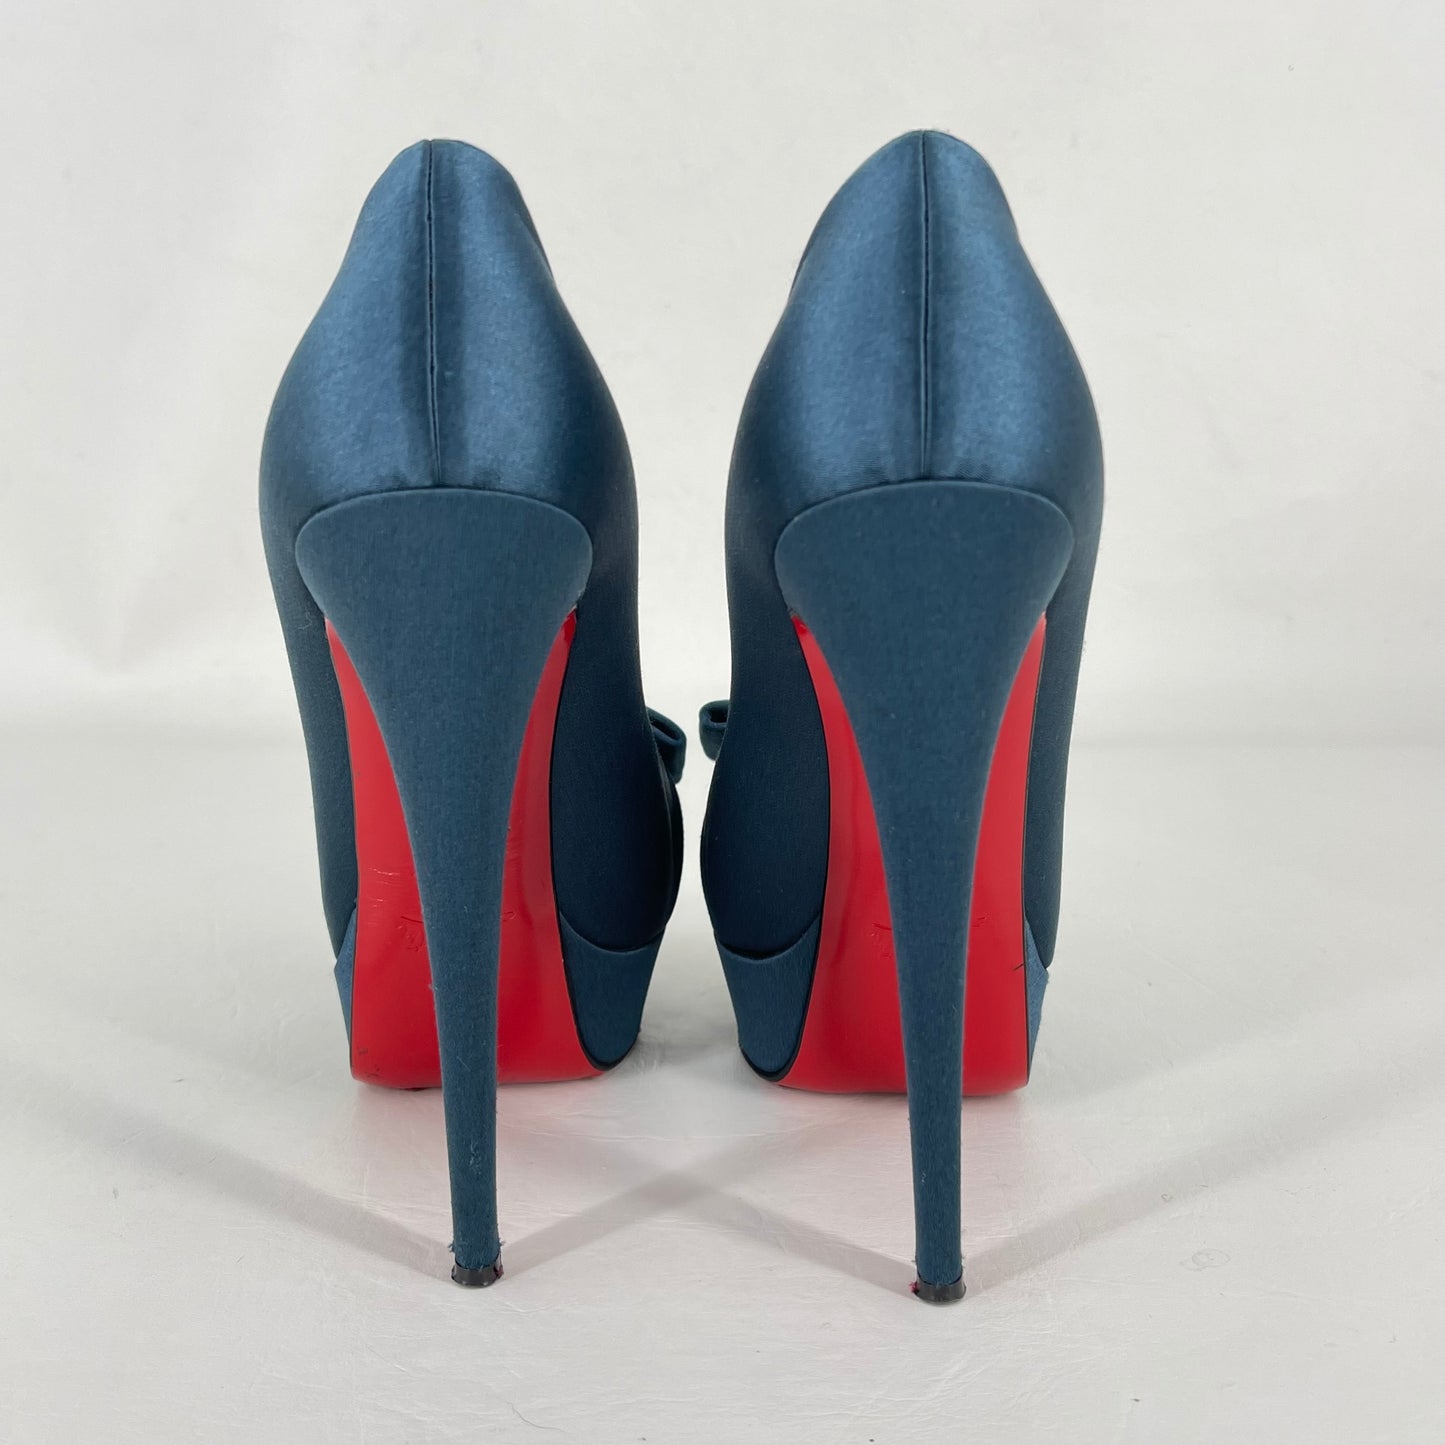 Authentic Christian Louboutin Satin Teal Madame Butterfly 150